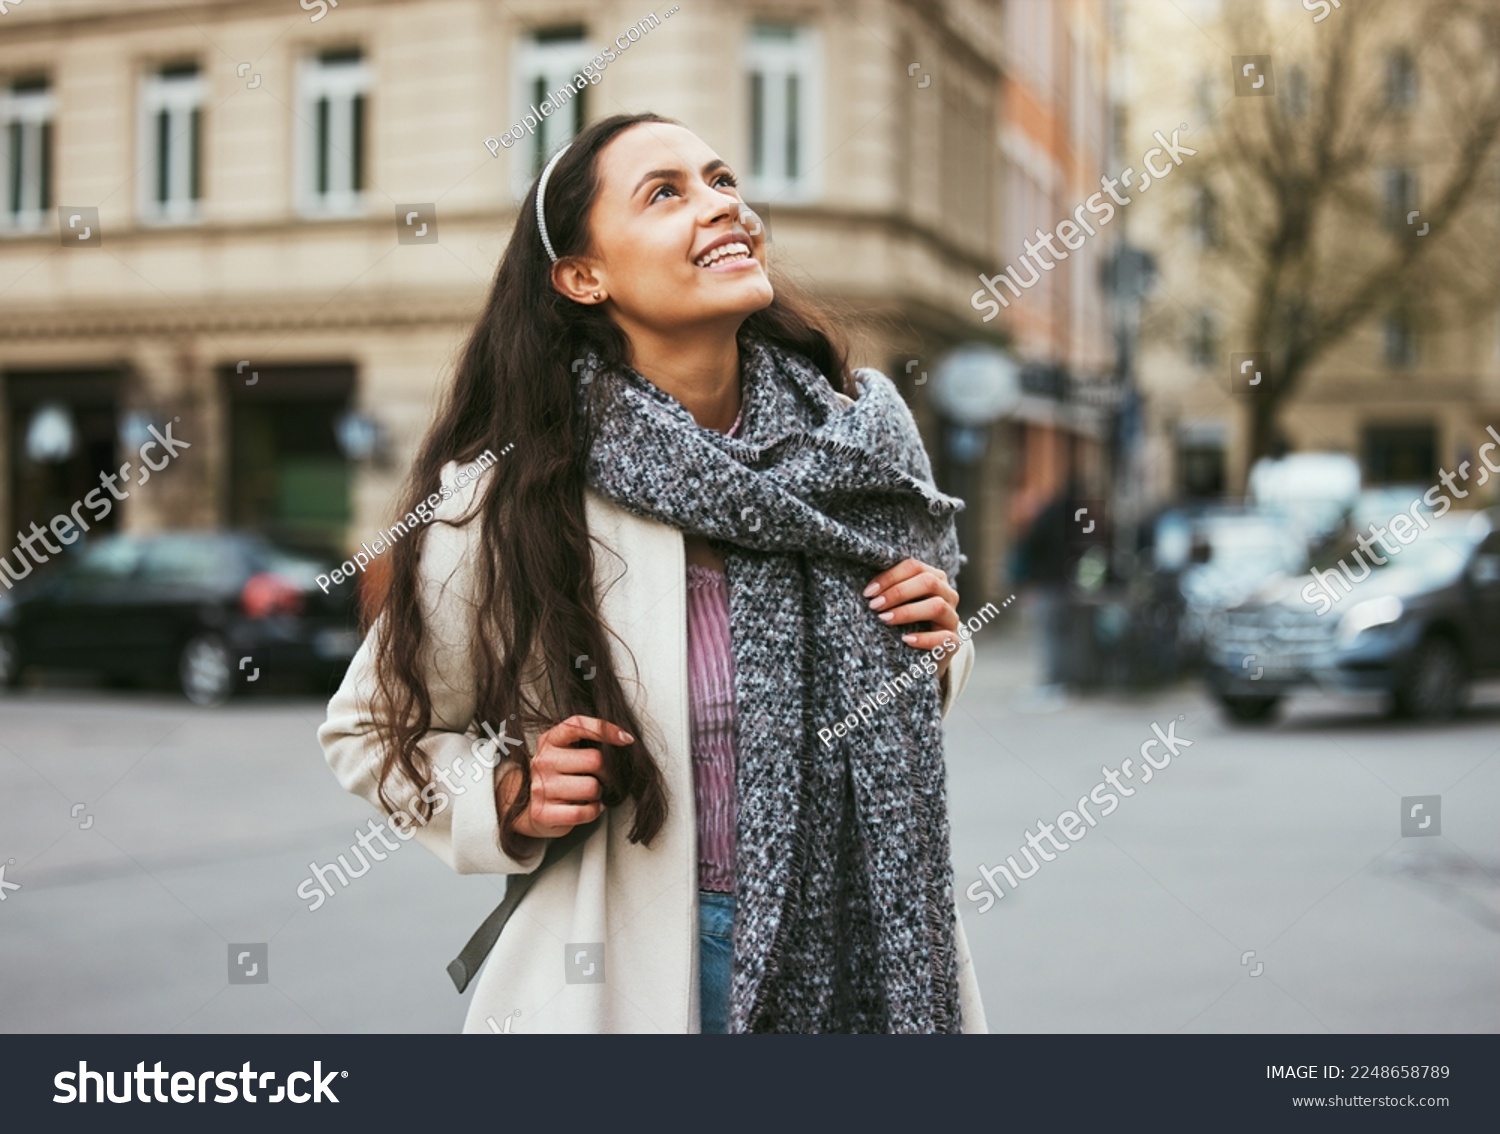 Walking, city buildings and happy woman on outdoor travel adventure in sidewalk street, road or journey In Chicago Illinois. Urban architecture, beauty and girl smile on winter vacation tour in USA #2248658789